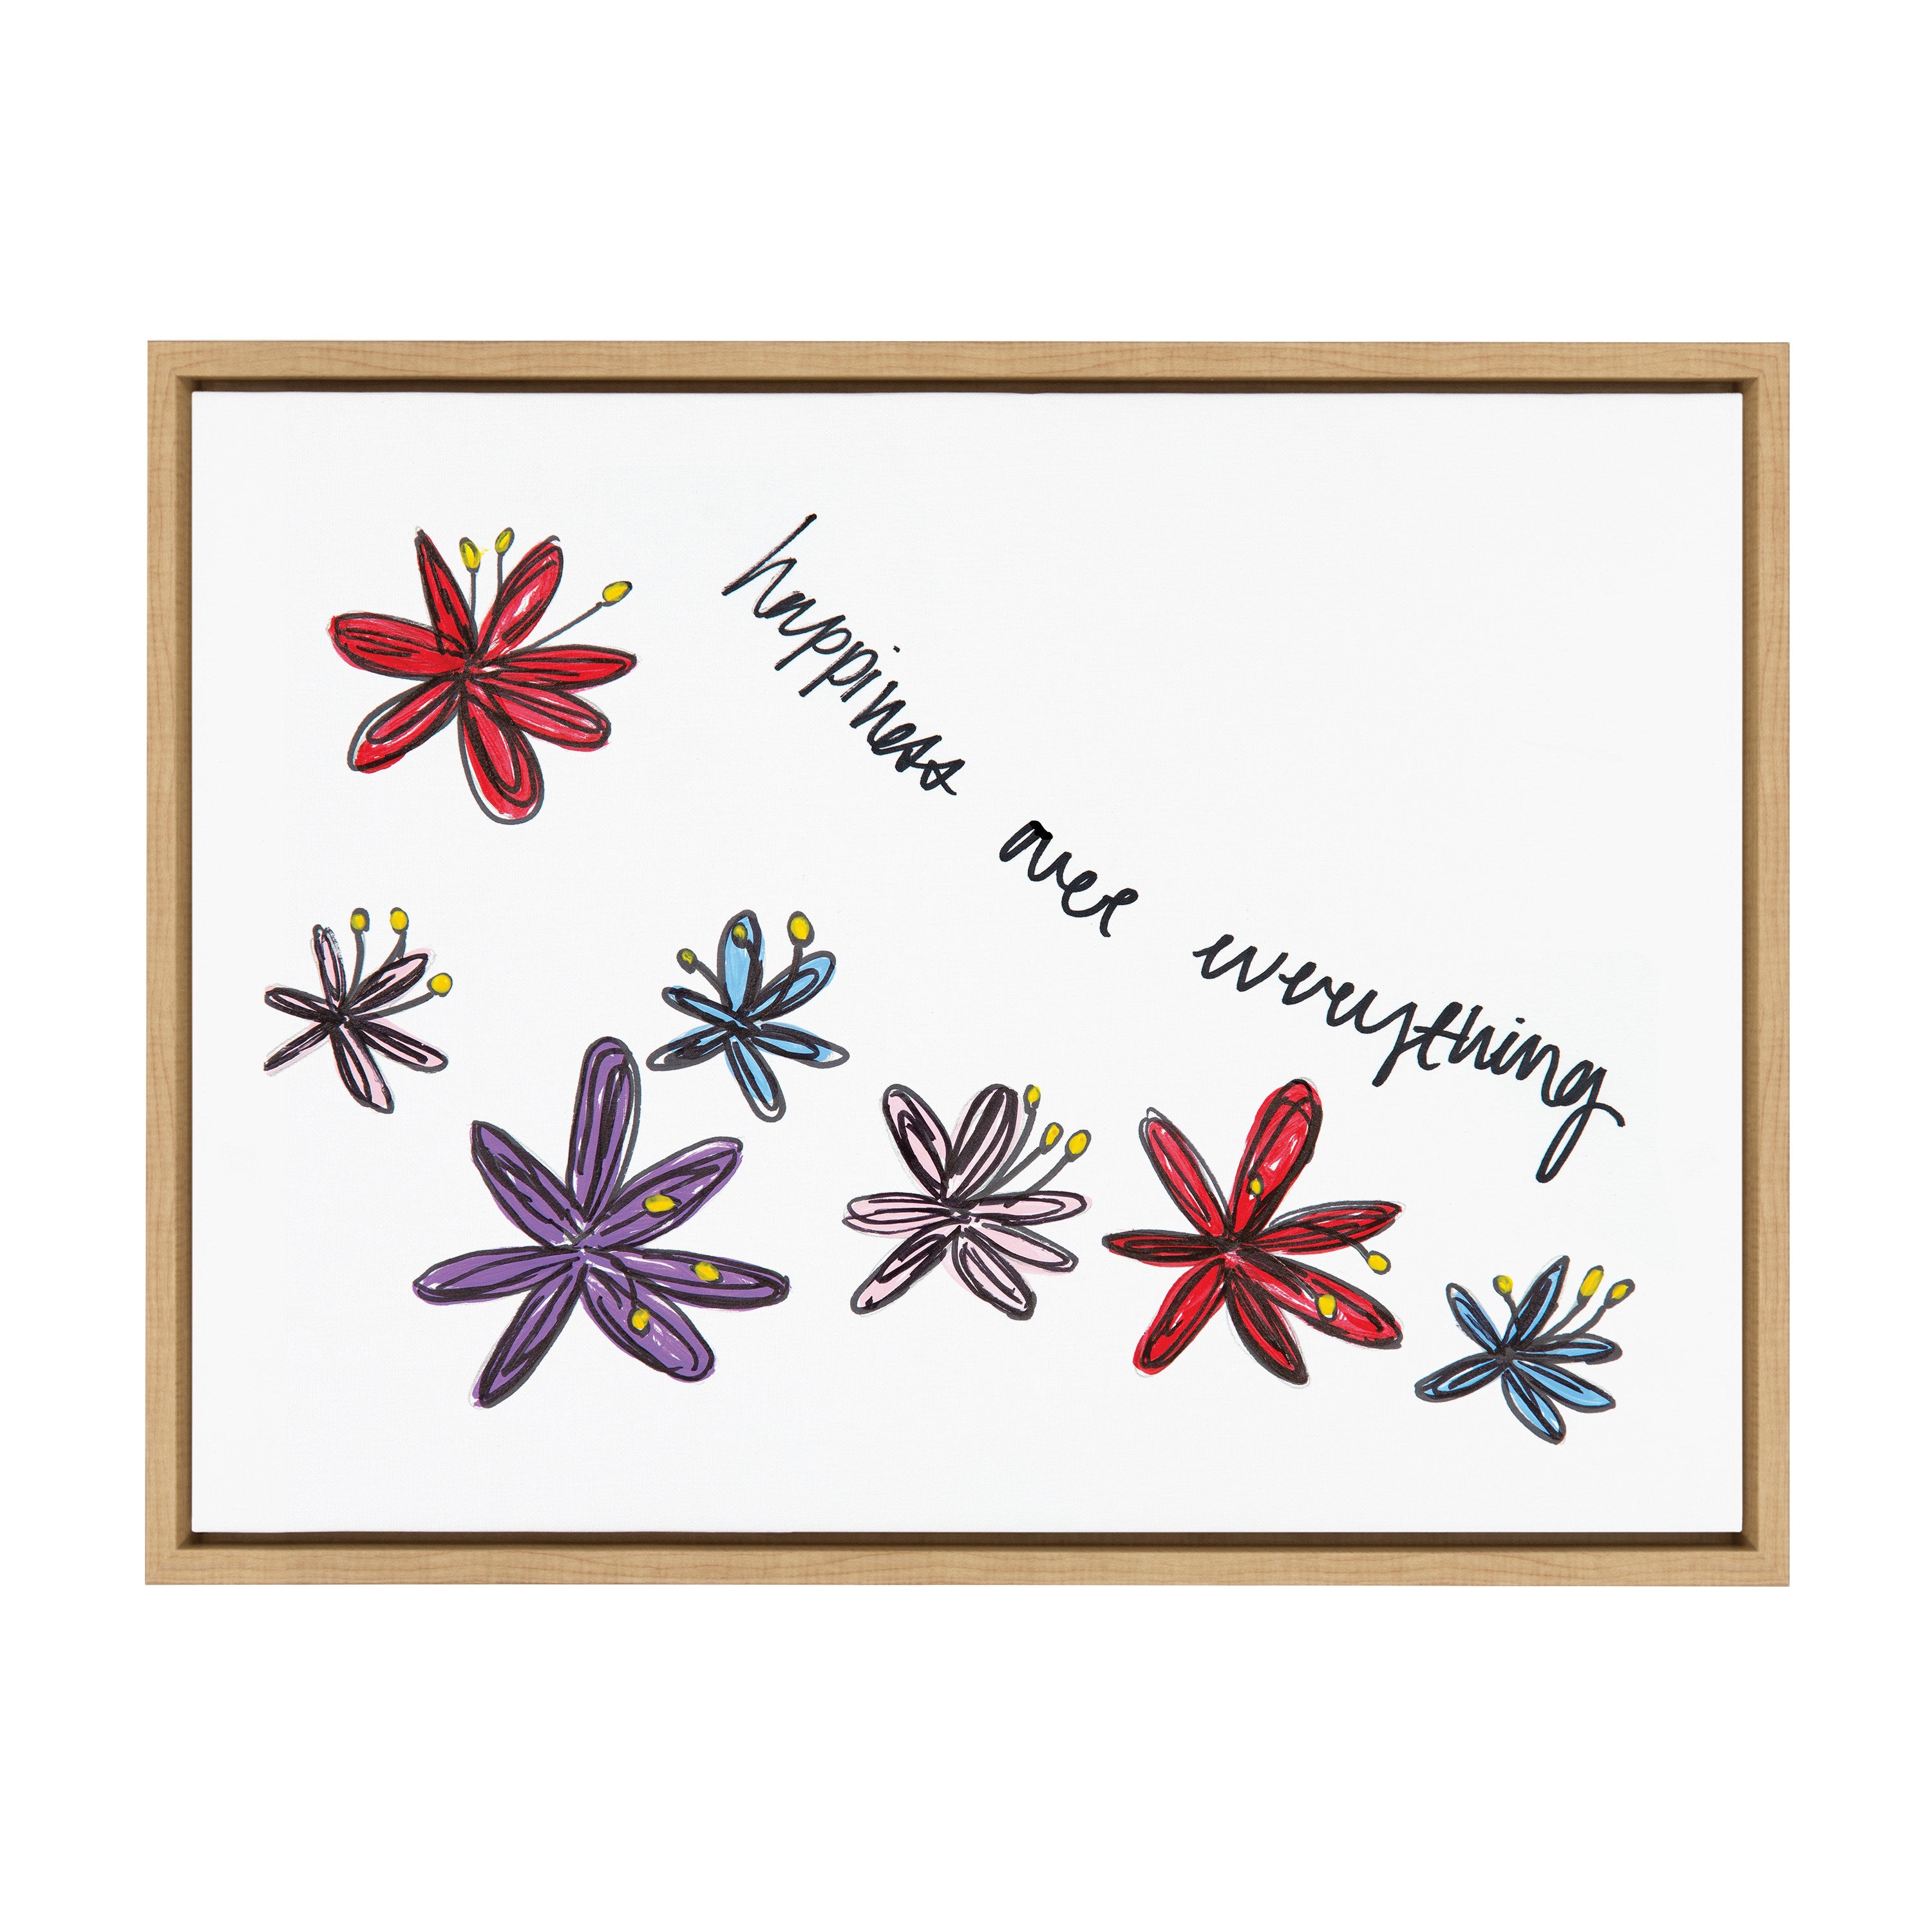 Sylvie Happiness Over Everything Framed Canvas by Mentoring Positives